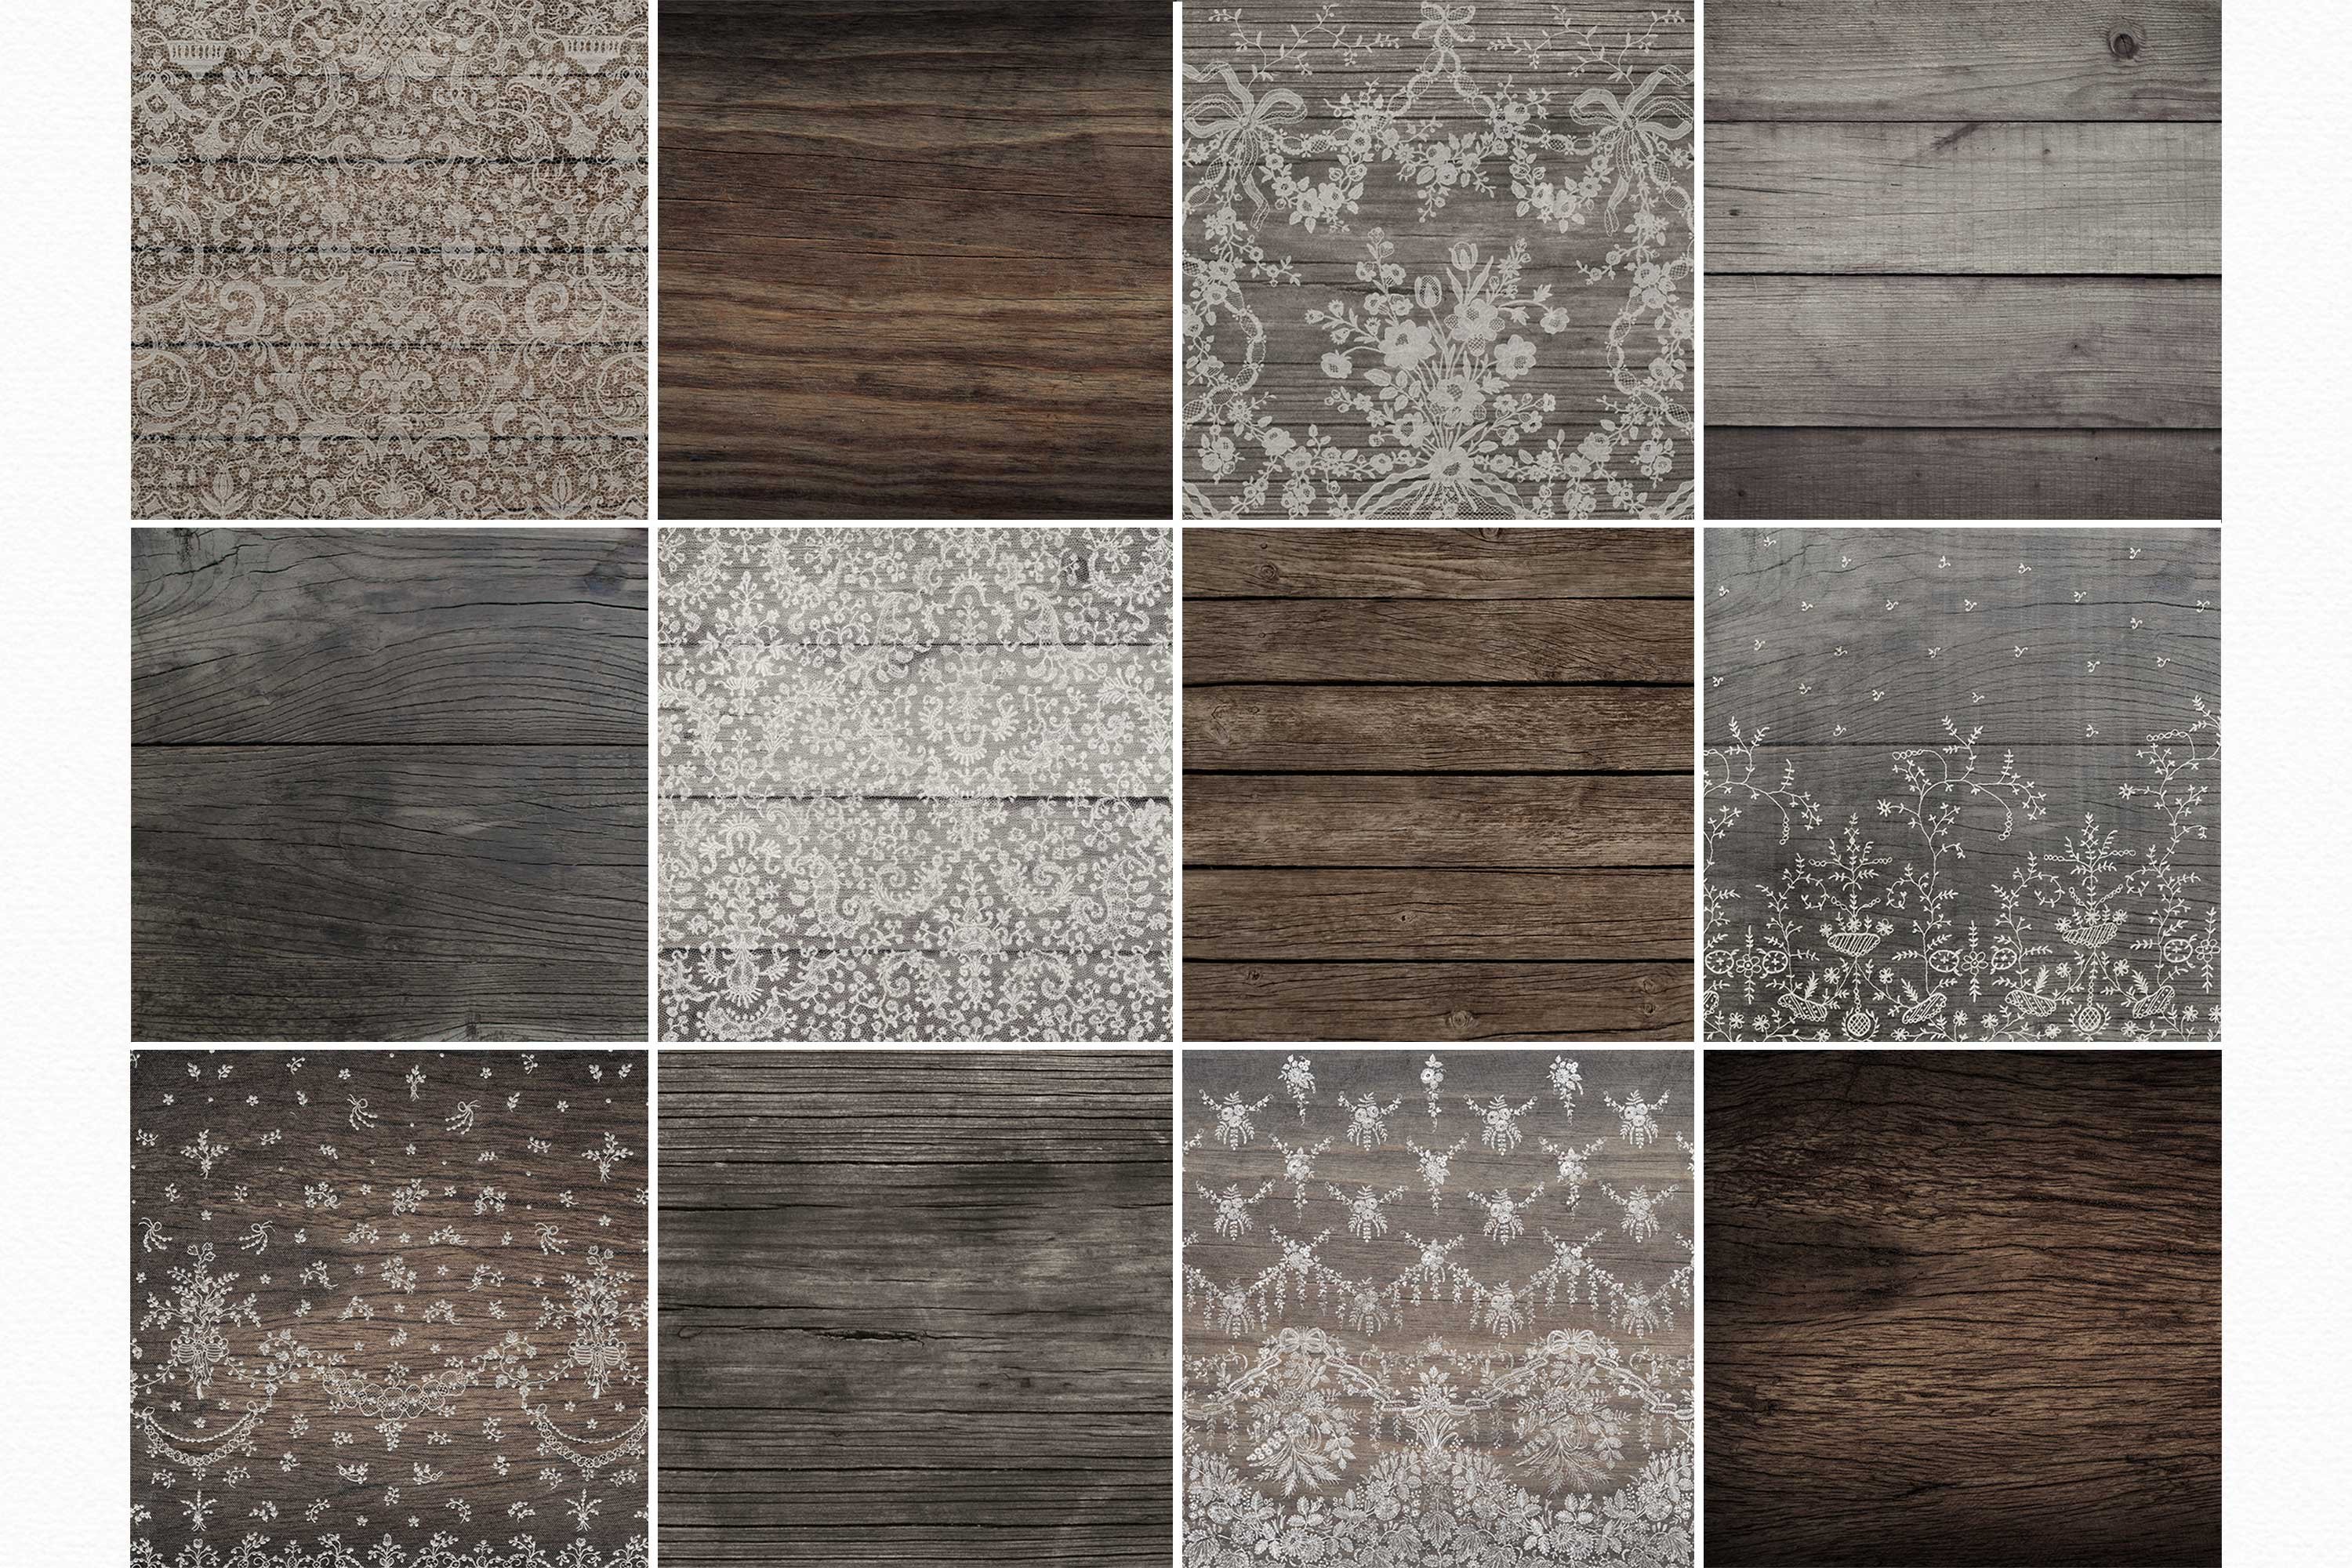 Antique Lace and Wood Textures preview image.